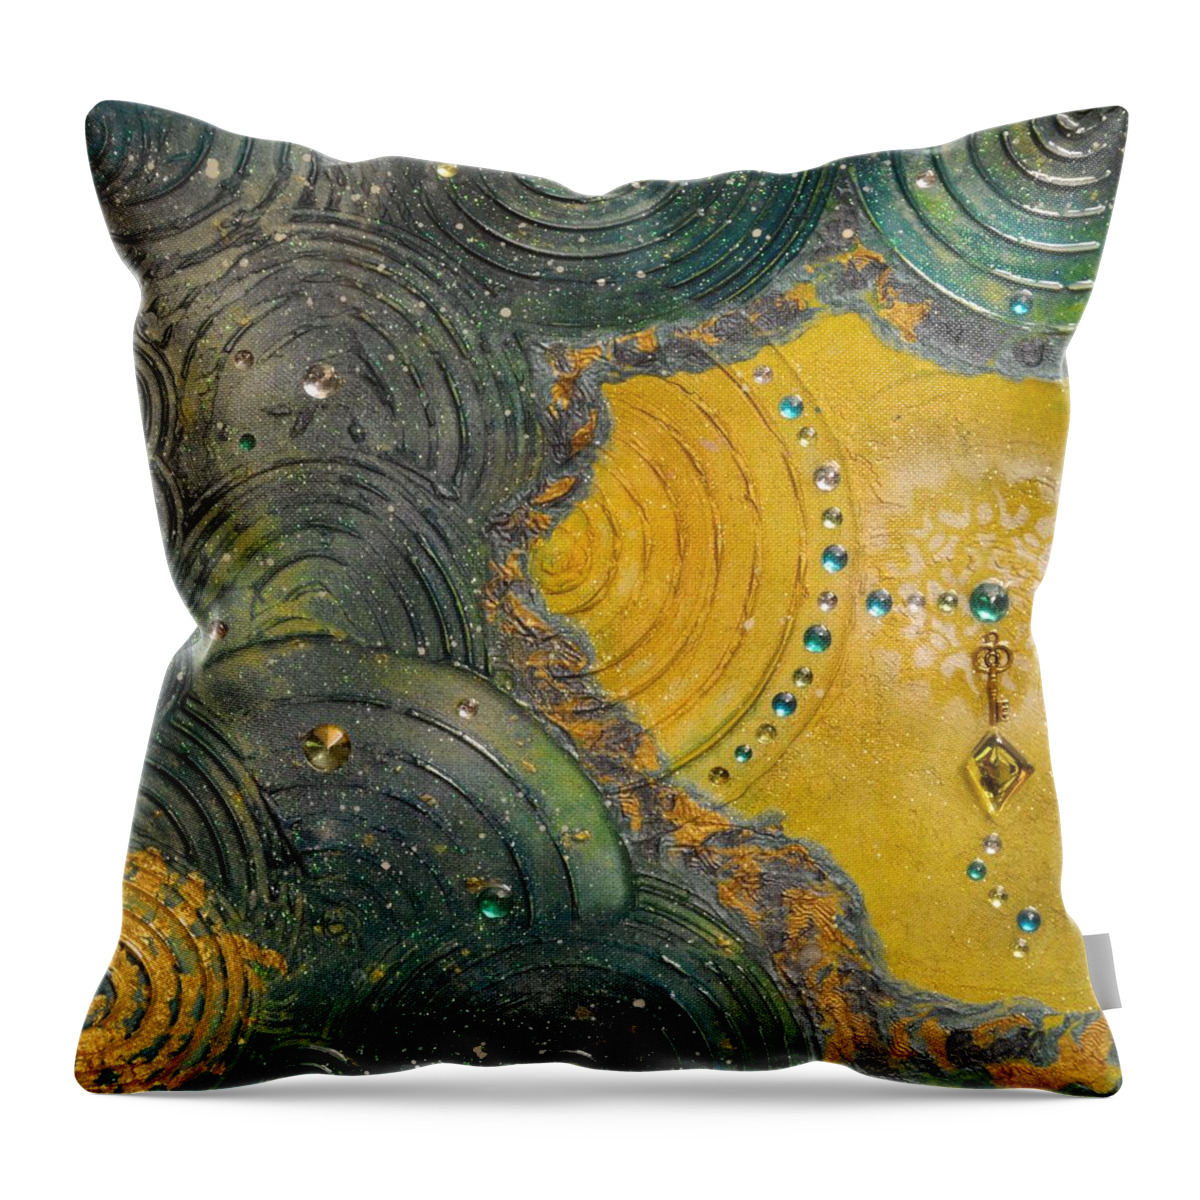 Cosmos Throw Pillow featuring the mixed media Retraction by MiMi Stirn